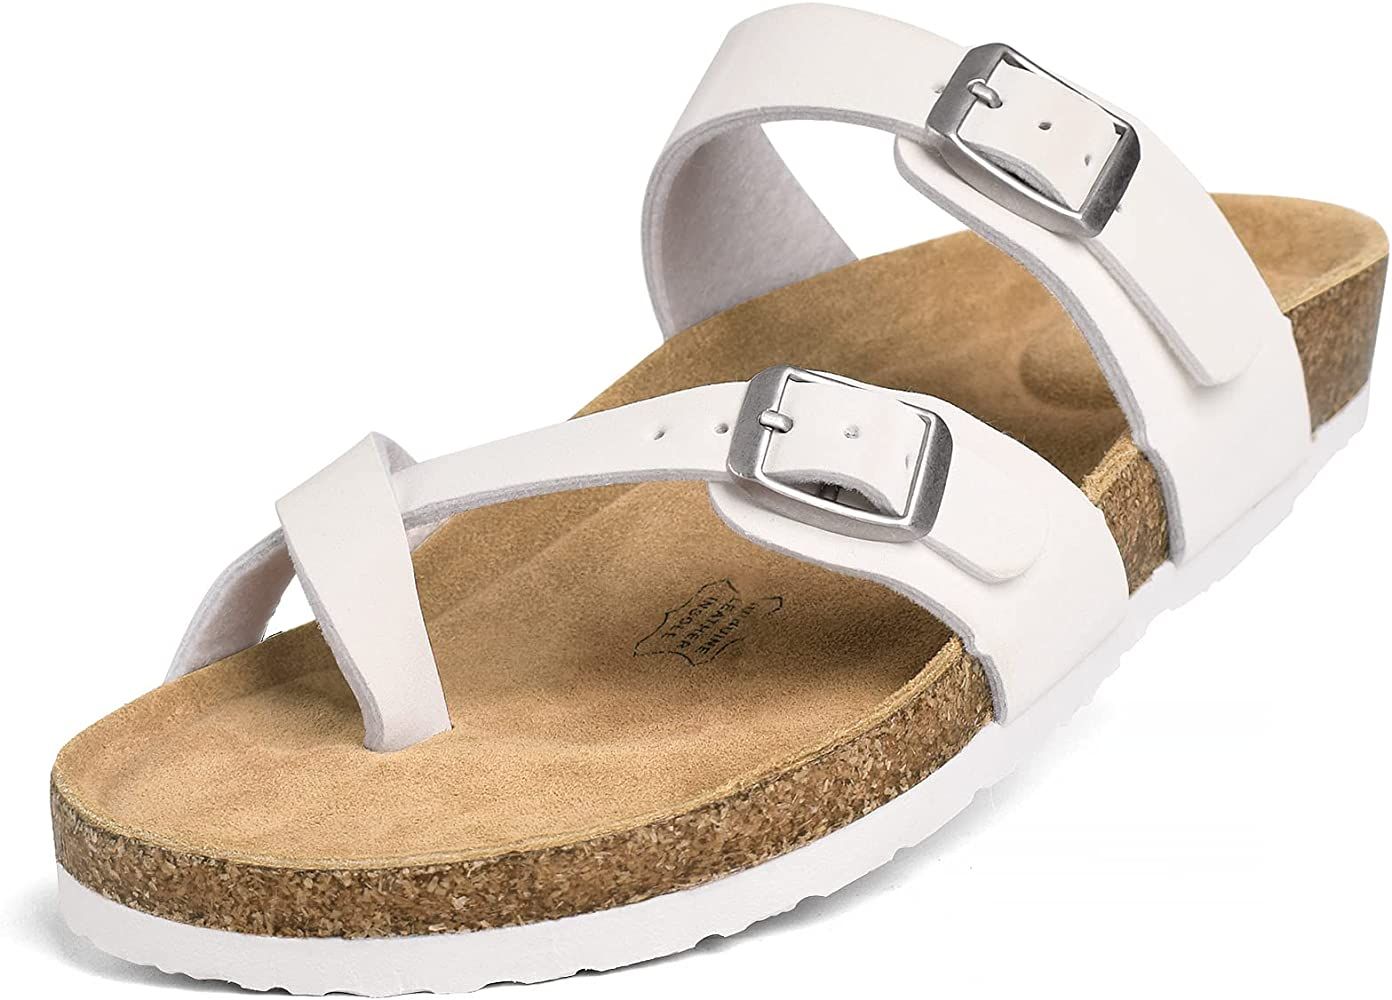 FITORY Womens Leather Slide Sandals with Comfort Cork Footbed | Amazon (US)